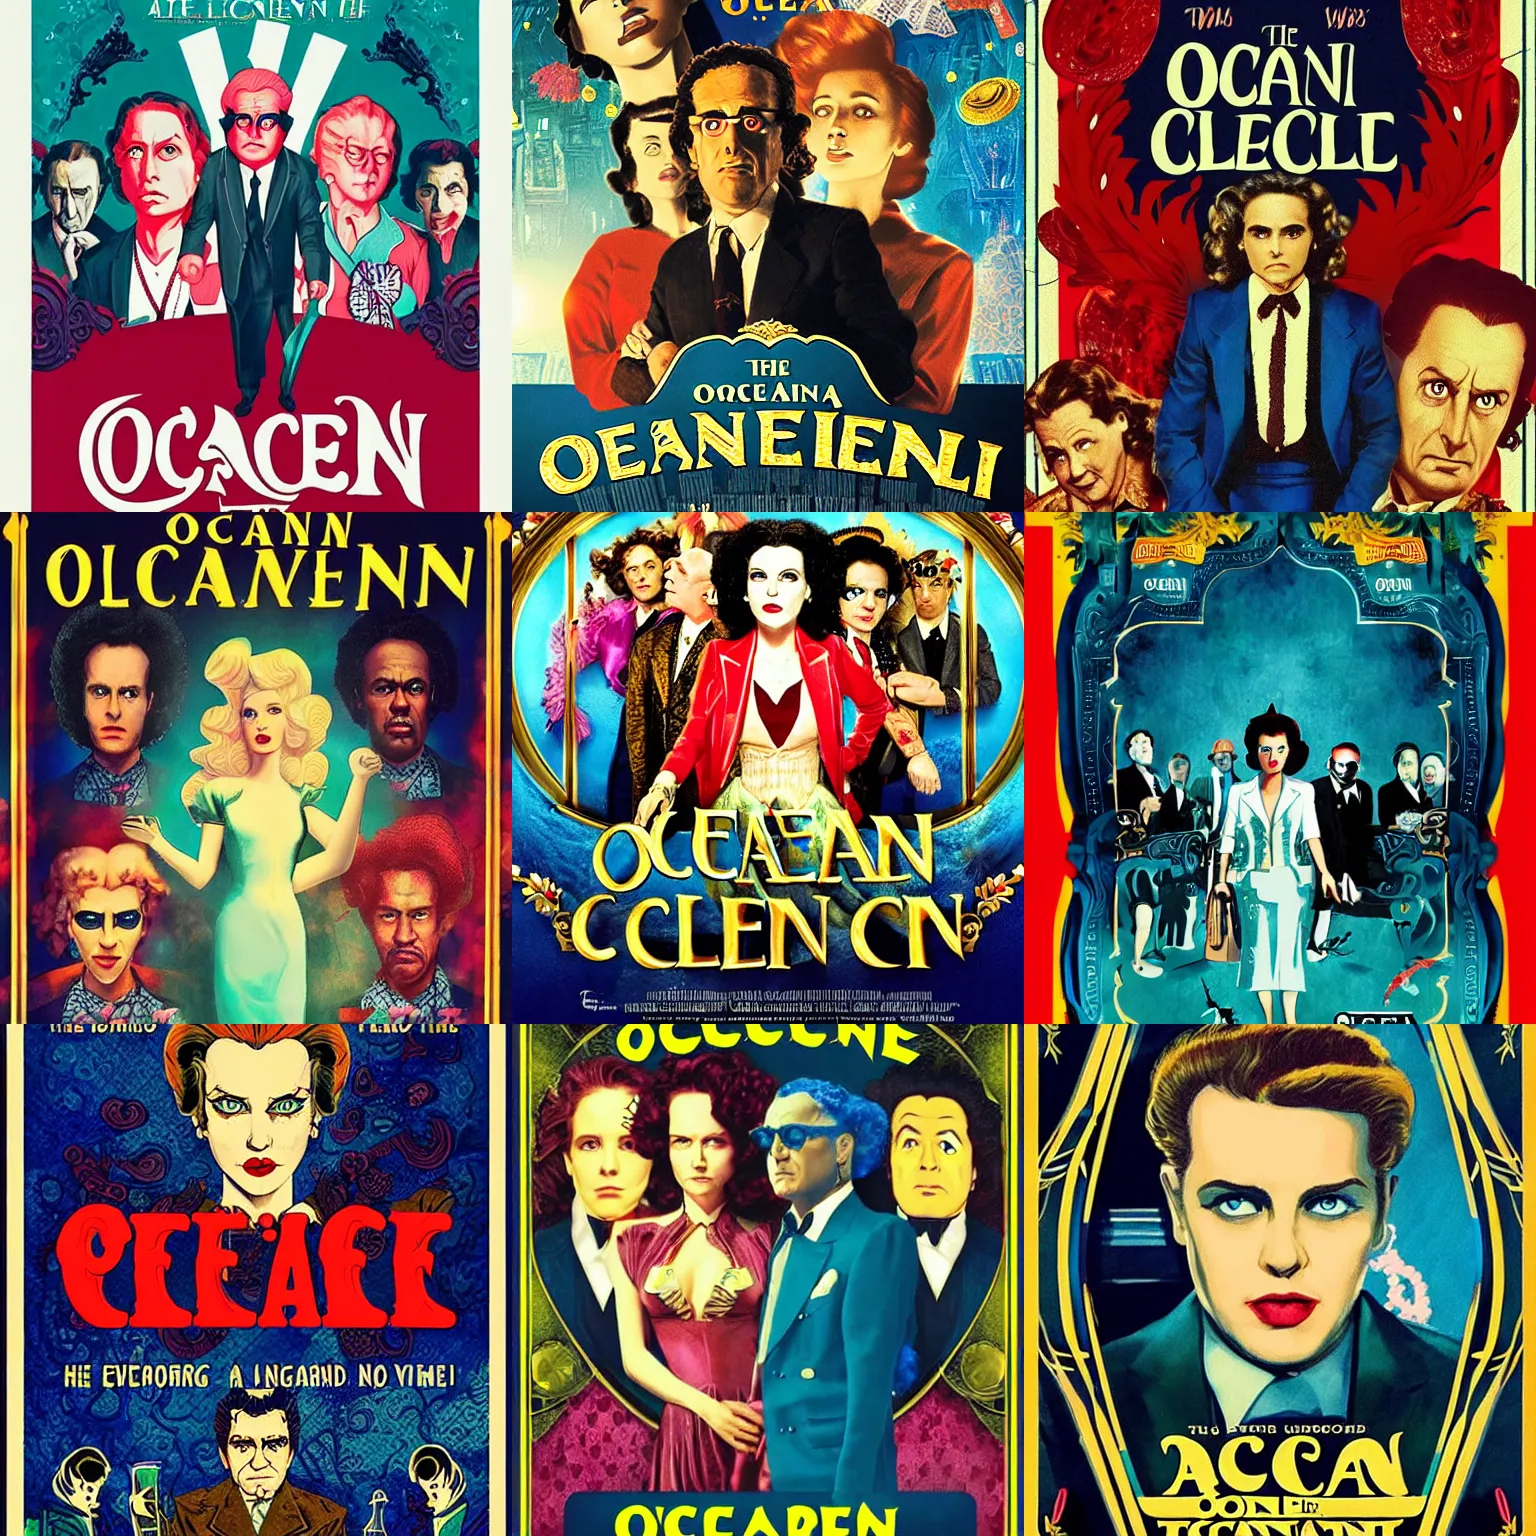 Prompt: the film poster of Ocean eleven in the style of Alice through the looking glass